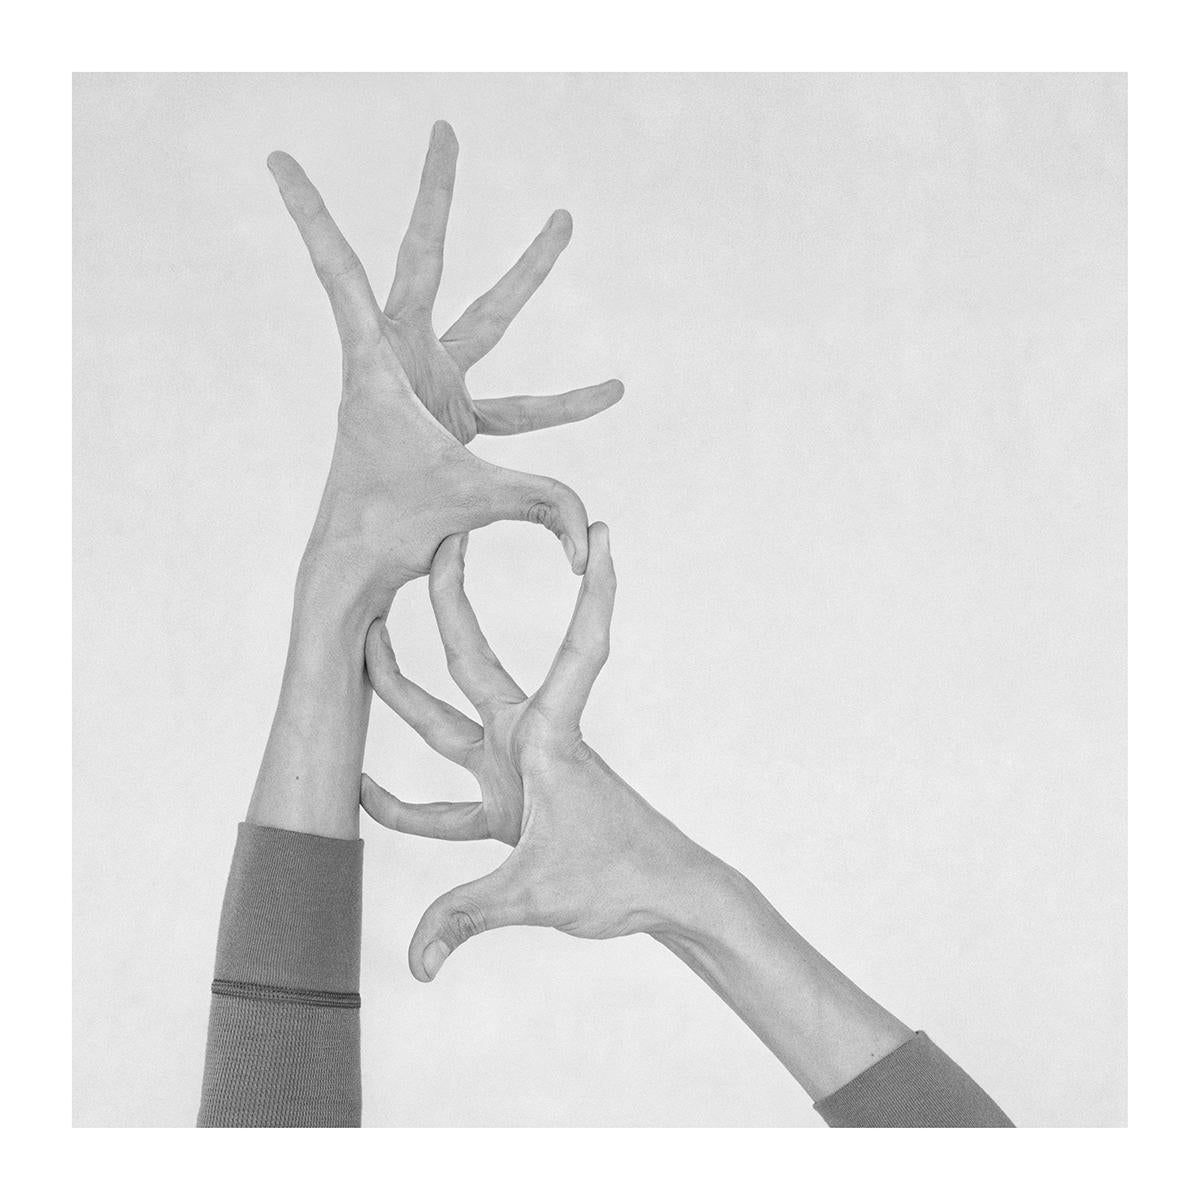 Nico Baixas / Gos-com-fuig Figurative Photograph - Untitled VI. From the Series Chiromorphose. Hands. Black & White Photography